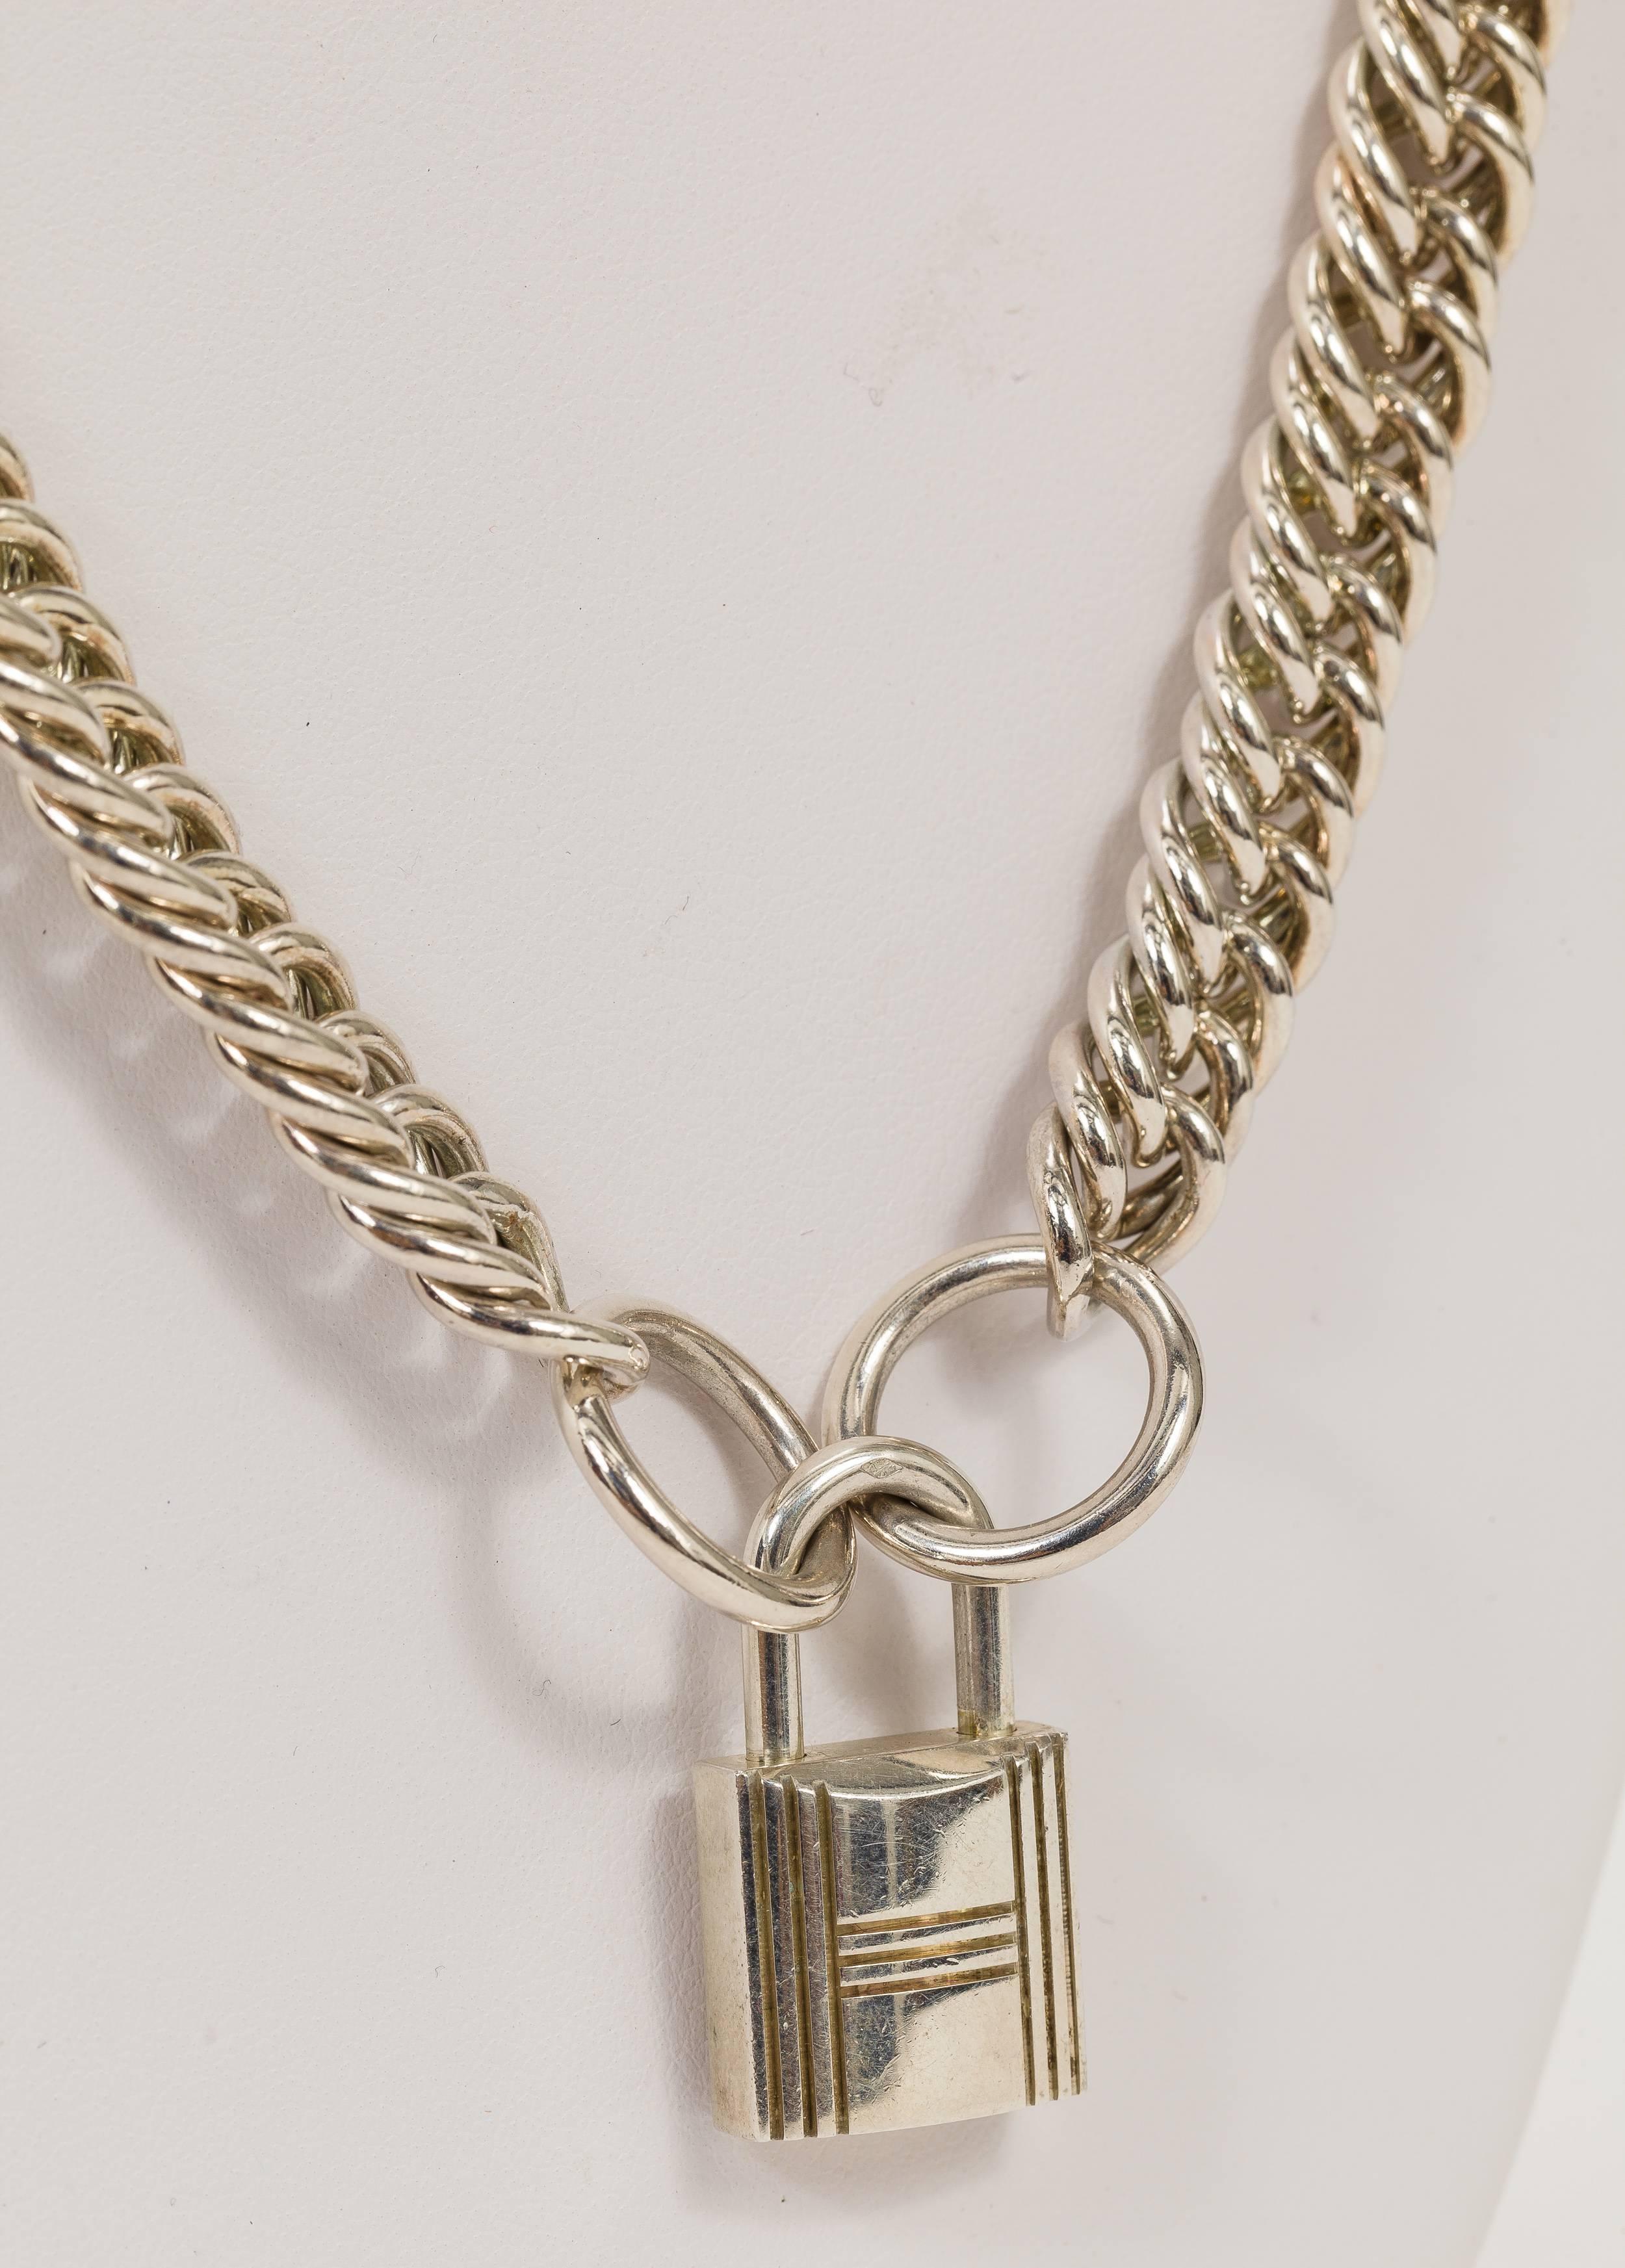 Modern Hermes heavy sterling silver open curb link necklace with an attached sterling silver Hermes lock charm. Weight of the sterling silver 6.395 troy ounce. Stamped 